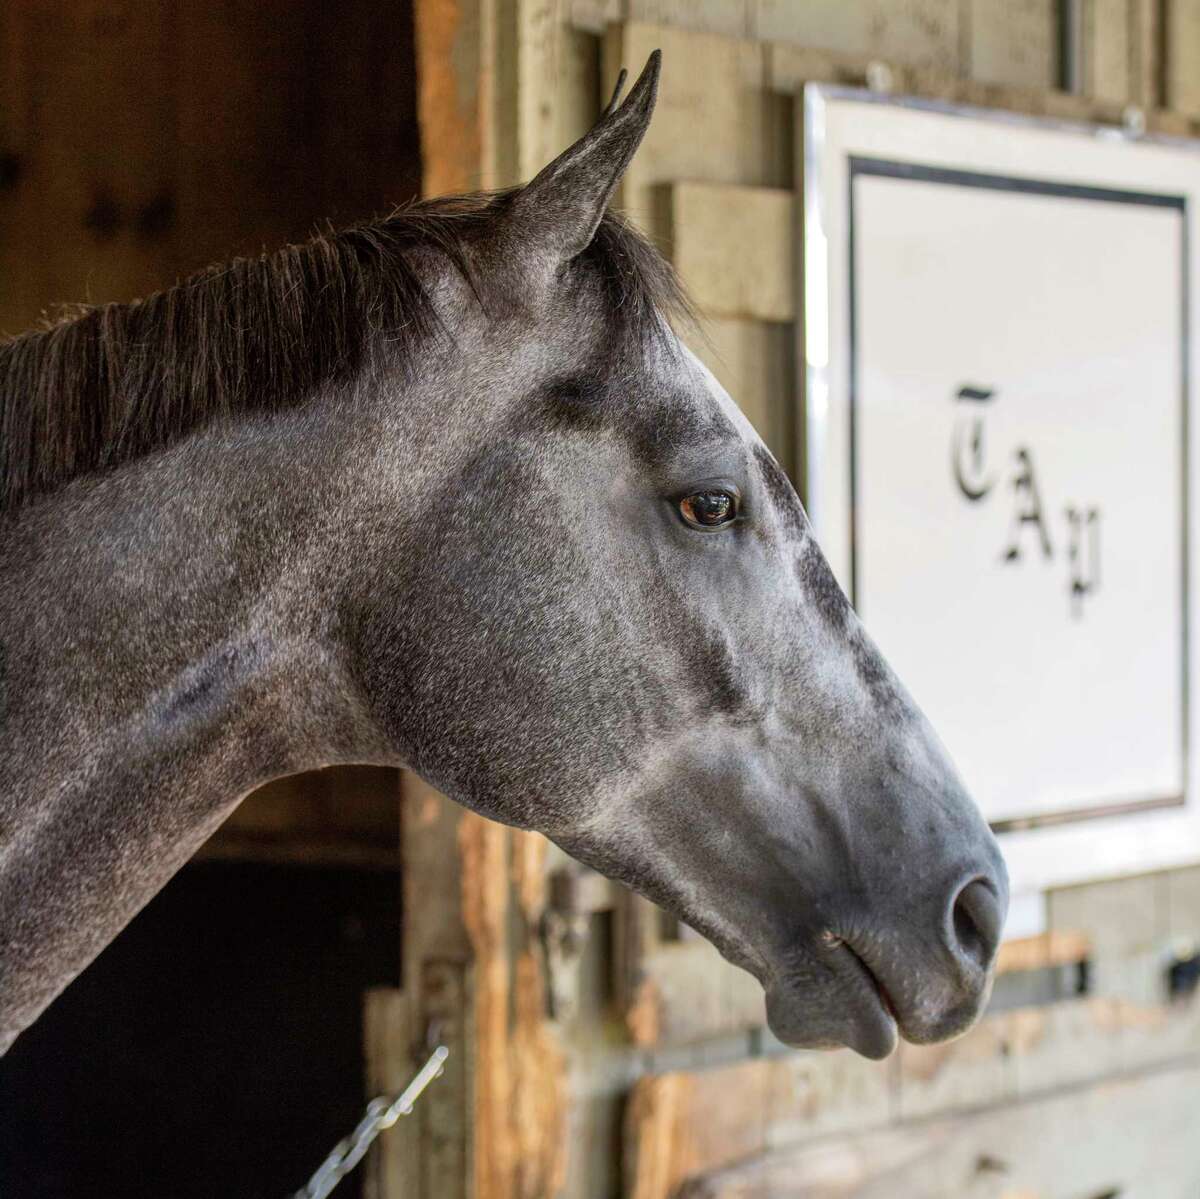 Gidu hangs out in his stall in trainer Todd Pletcher's training barn on the Oklahoma Training Center adjacent to the Saratoga Race Course waiting to watch one of his horses to work Thursday Aug. 8, 2019 in Saratoga Springs, N.Y. Photo Special to the Times Union by Skip Dickstein